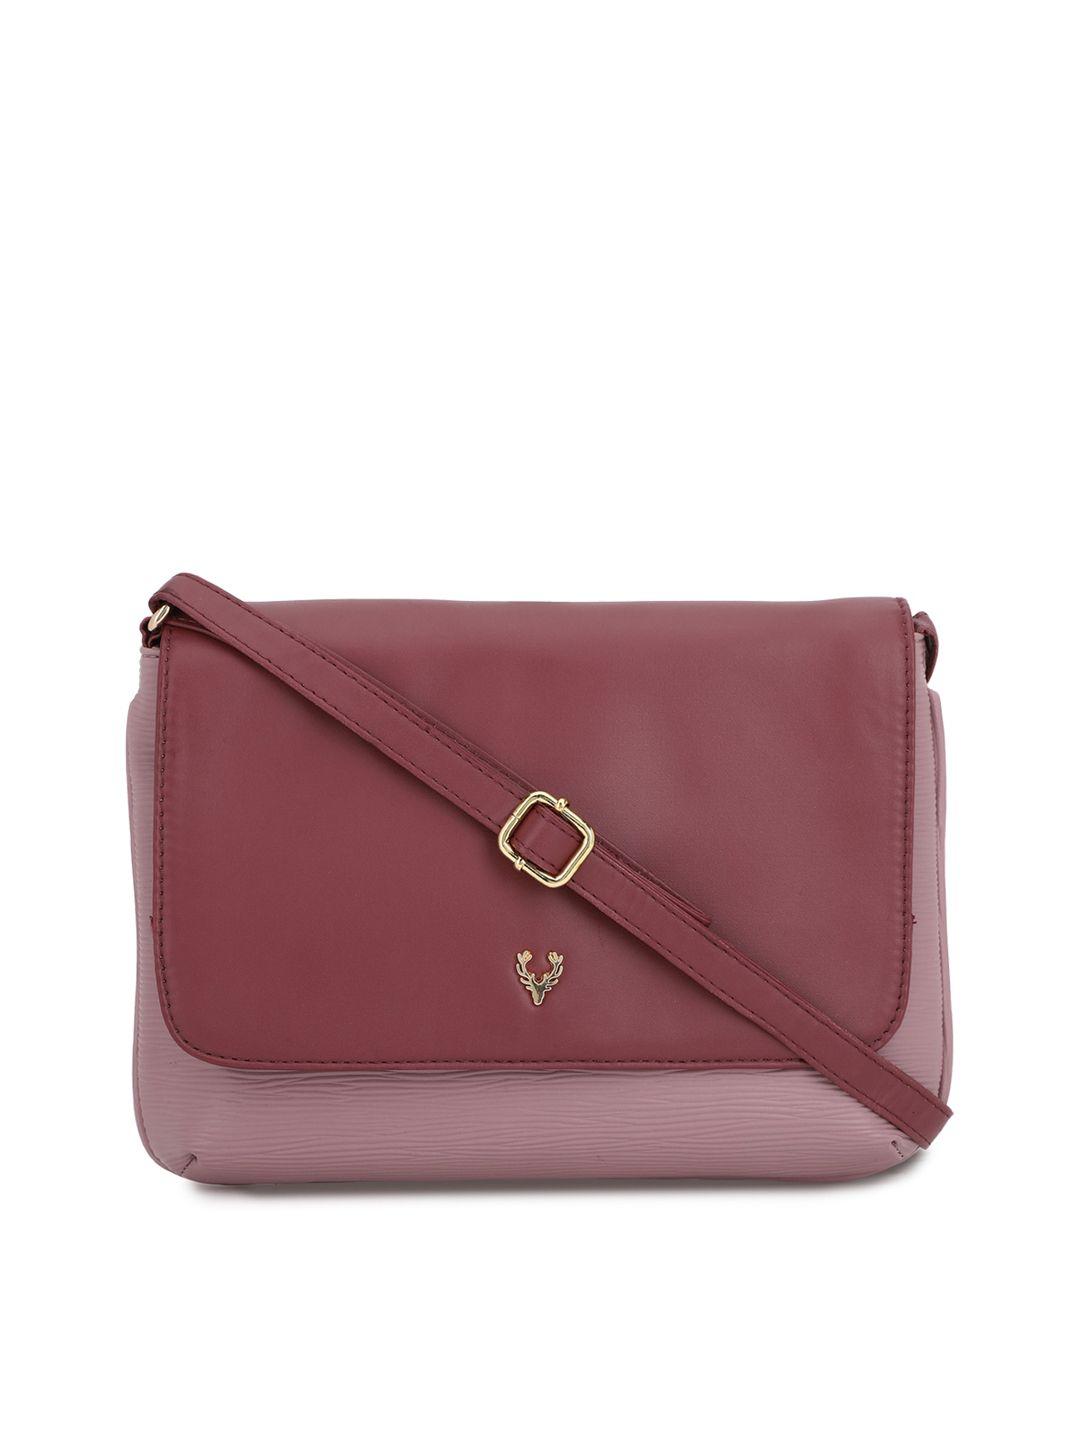 allen solly purple pu structured sling bag